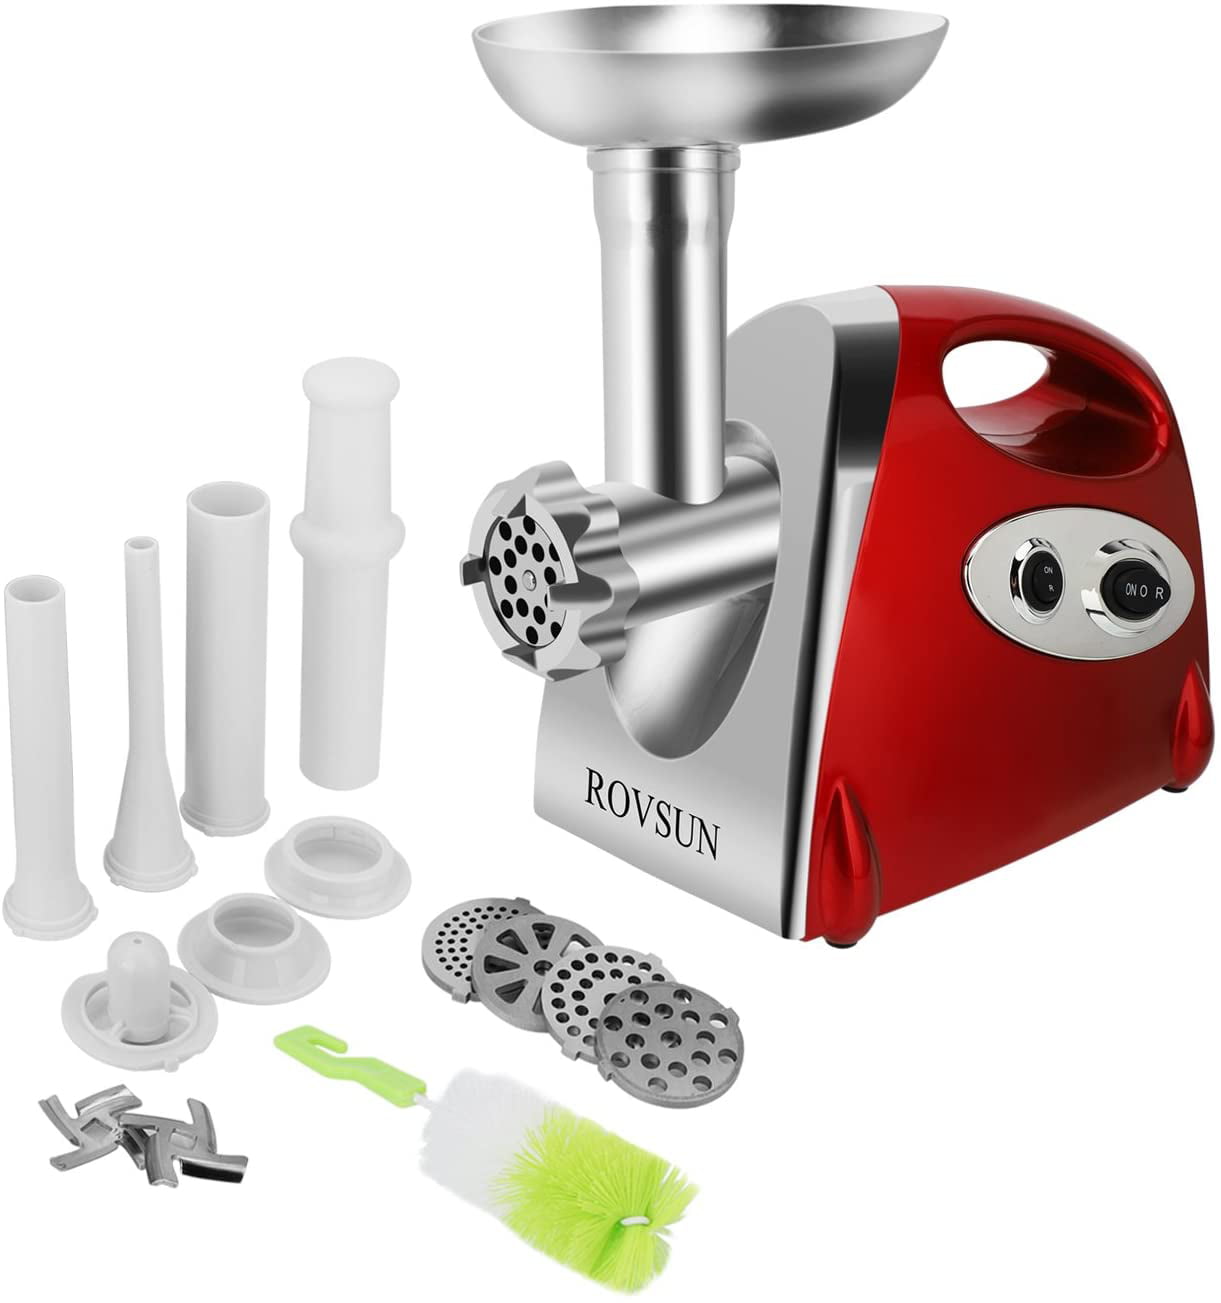 CEHNXIU Electric Meat Grinder and Sausage Stuffer Maker 800W Max with Stainless Steel Cutting Blade and 3 Cutting Plates and 3 Sausage Stuff Tube,Heavy Duty Meats Mincer for Home UseCommercial 